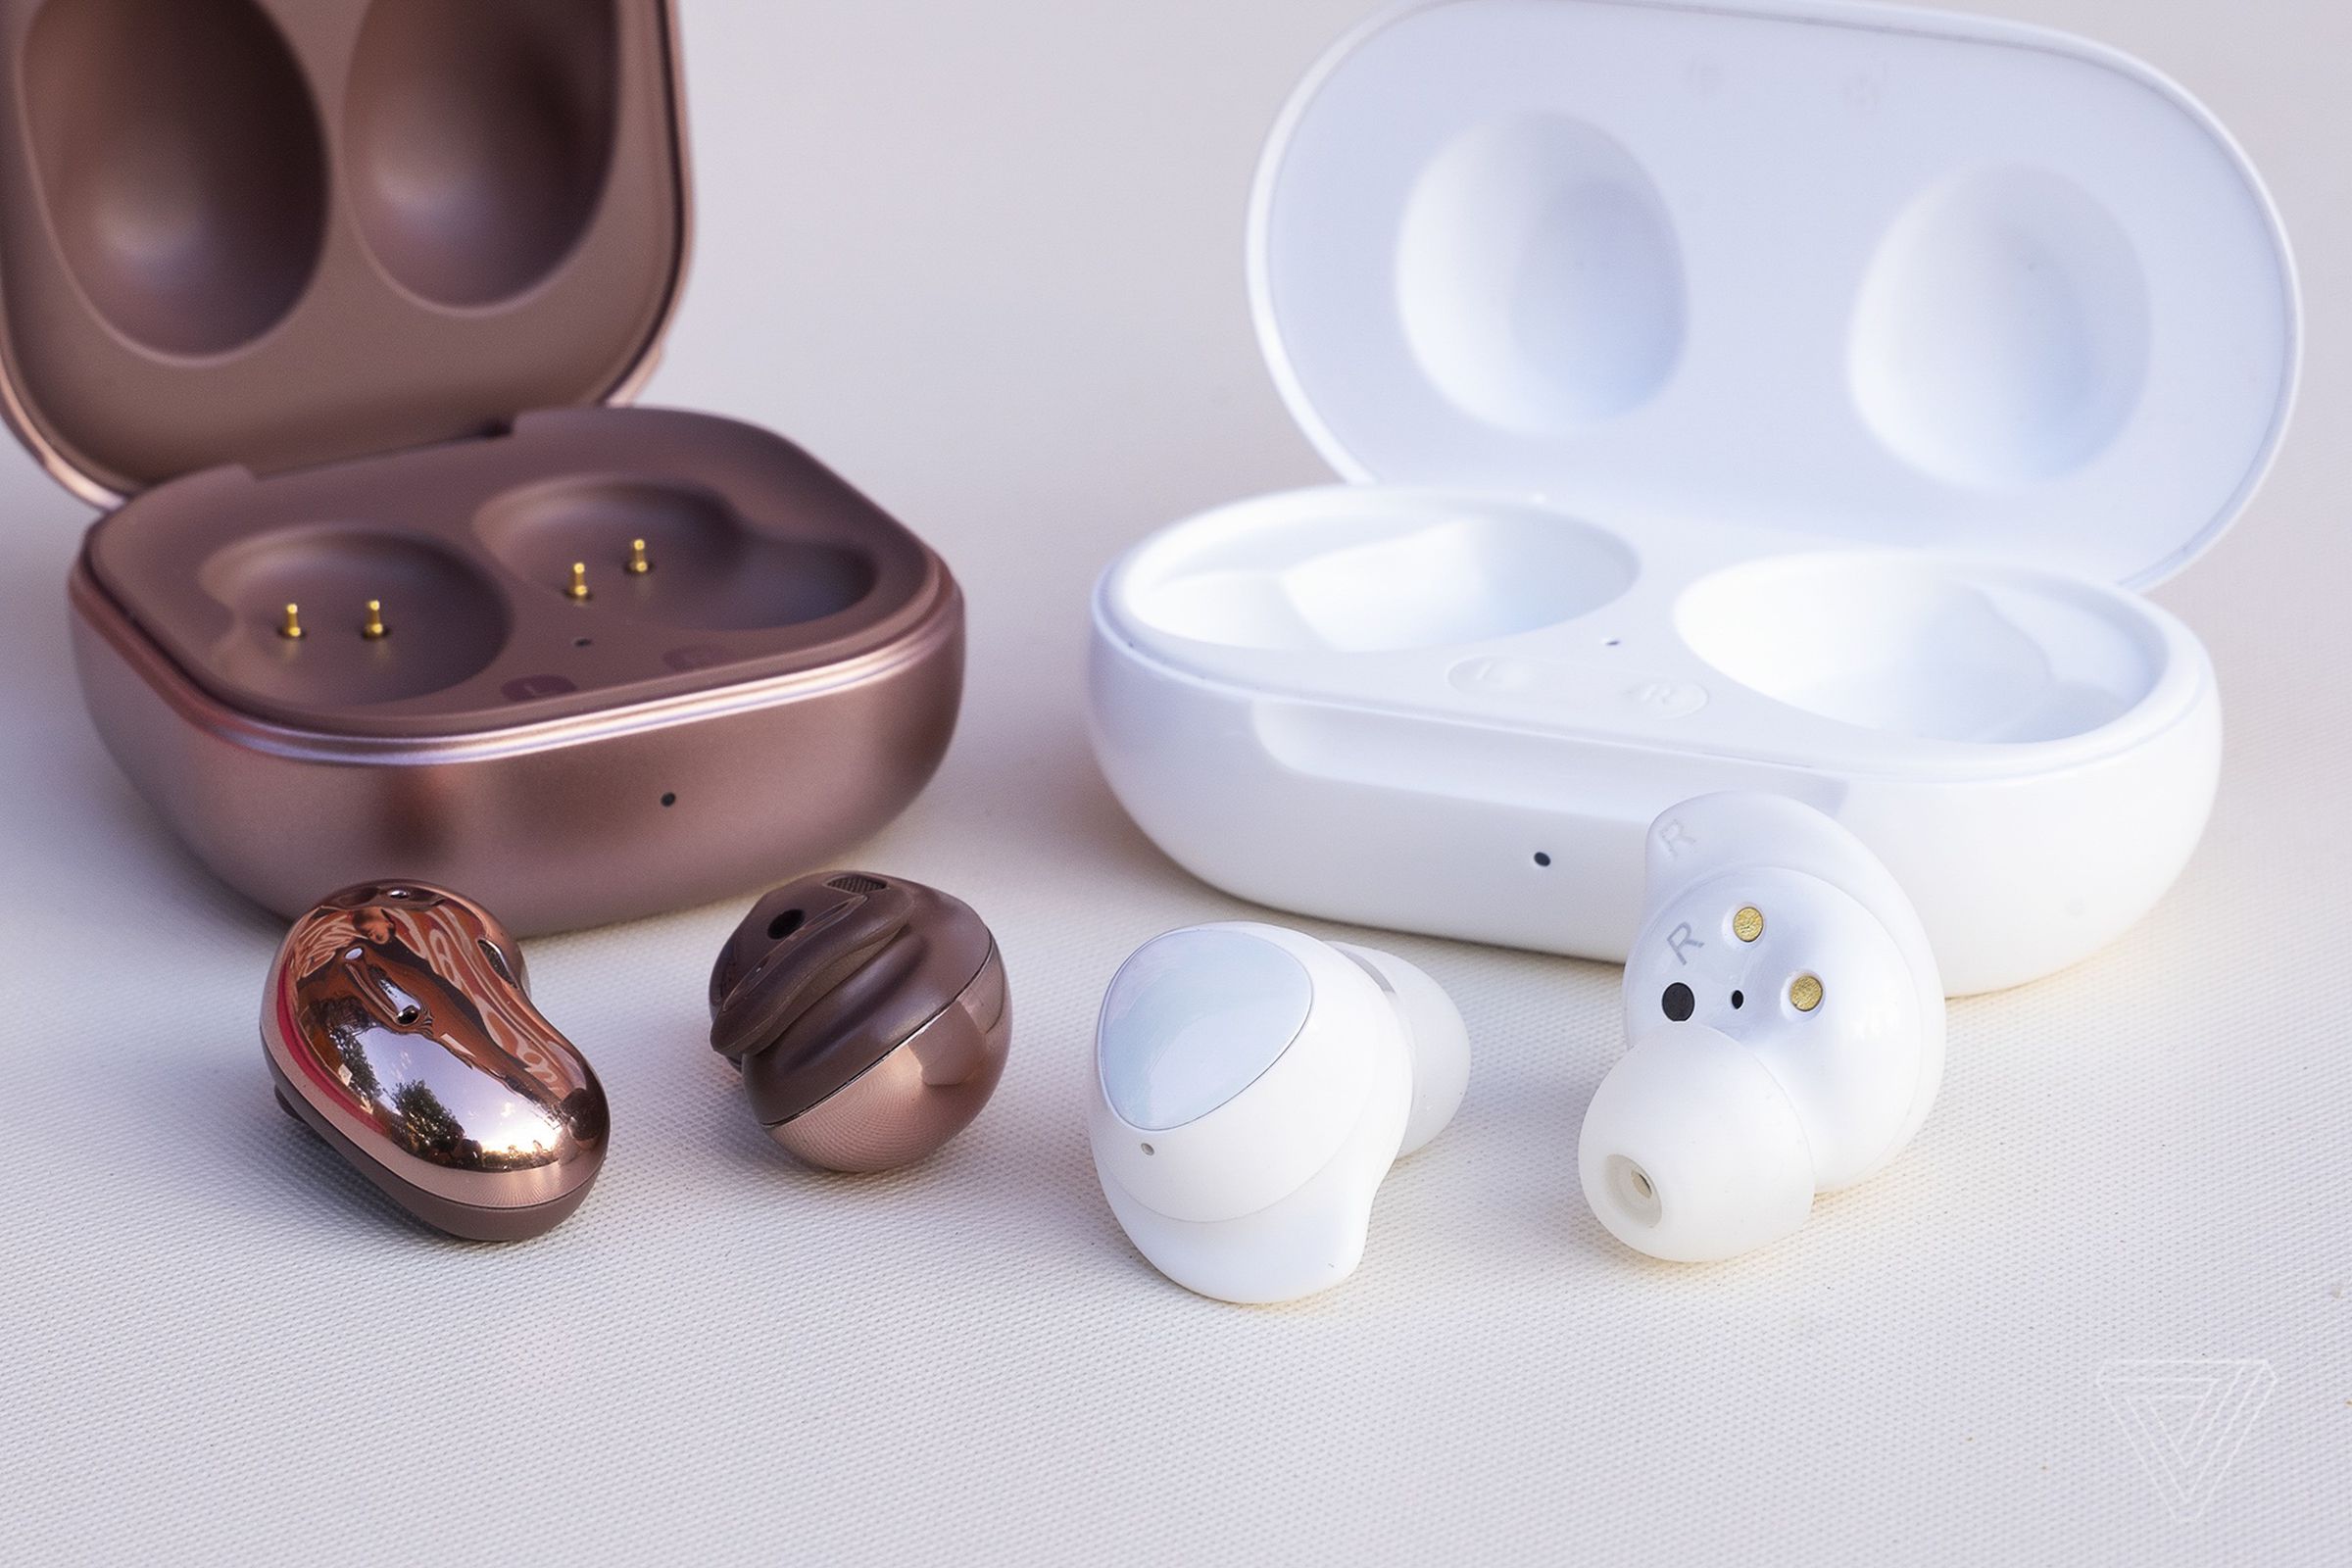 Samsung’s Galaxy Buds Plus have a more traditional design with silicone ear tips.